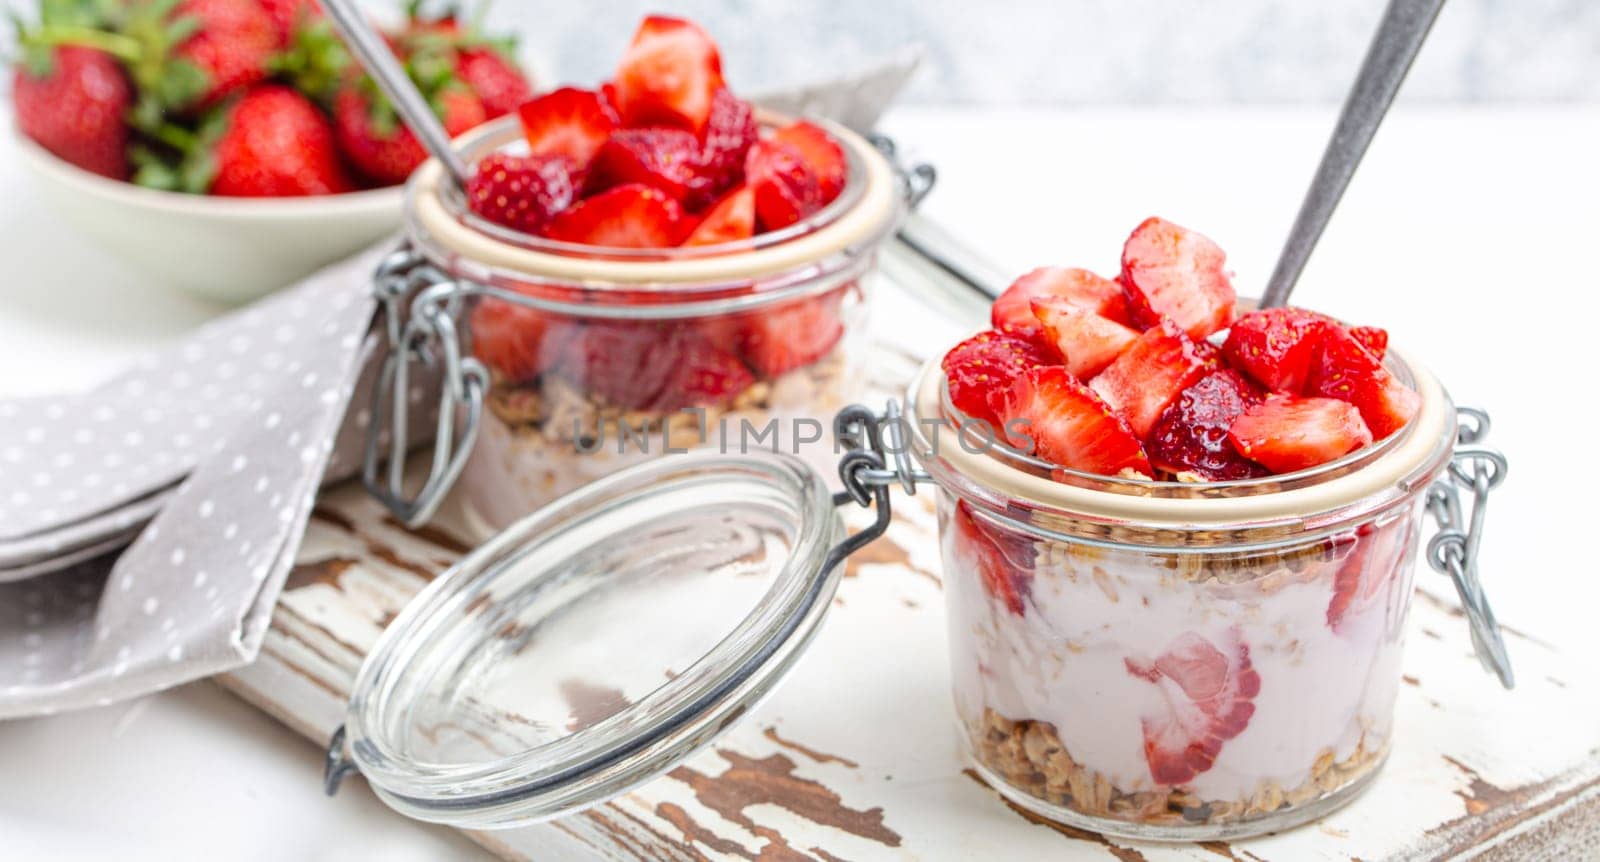 Parfait with Fresh Strawberries, Yoghurt and Crunchy Granola in Transparent Glass Mason Jars on White Rustic Wooden Background from Angle View, Healthy Breakfast or Light Summer Fruit Dessert